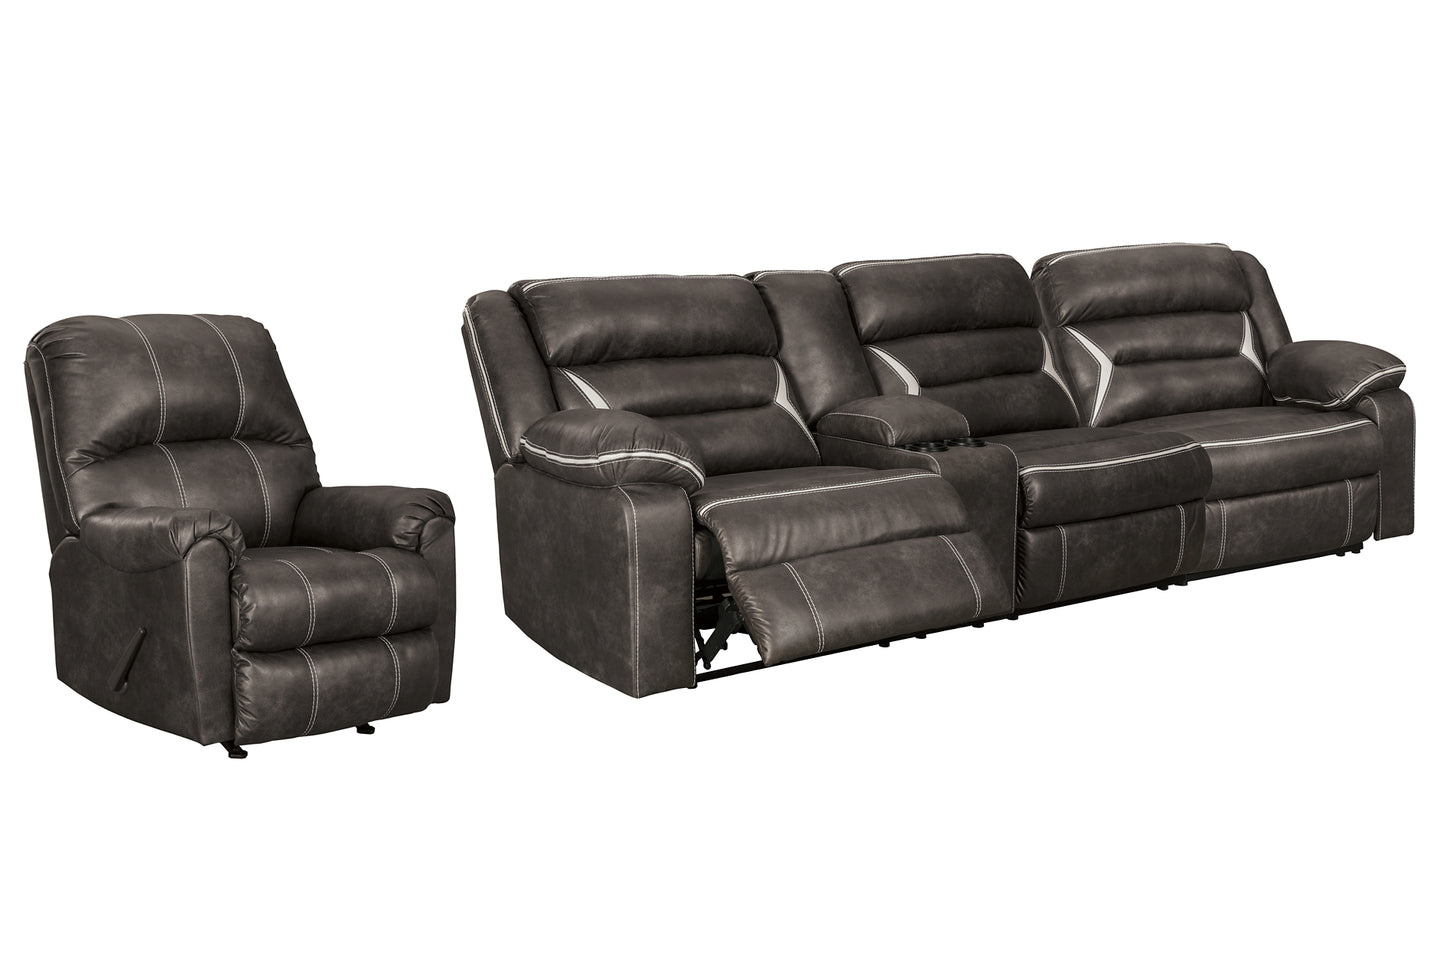 Kincord 2-Piece Sectional with Recliner Wilson Furniture (OH)  in Bridgeport, Ohio. Serving Bridgeport, Yorkville, Bellaire, & Avondale